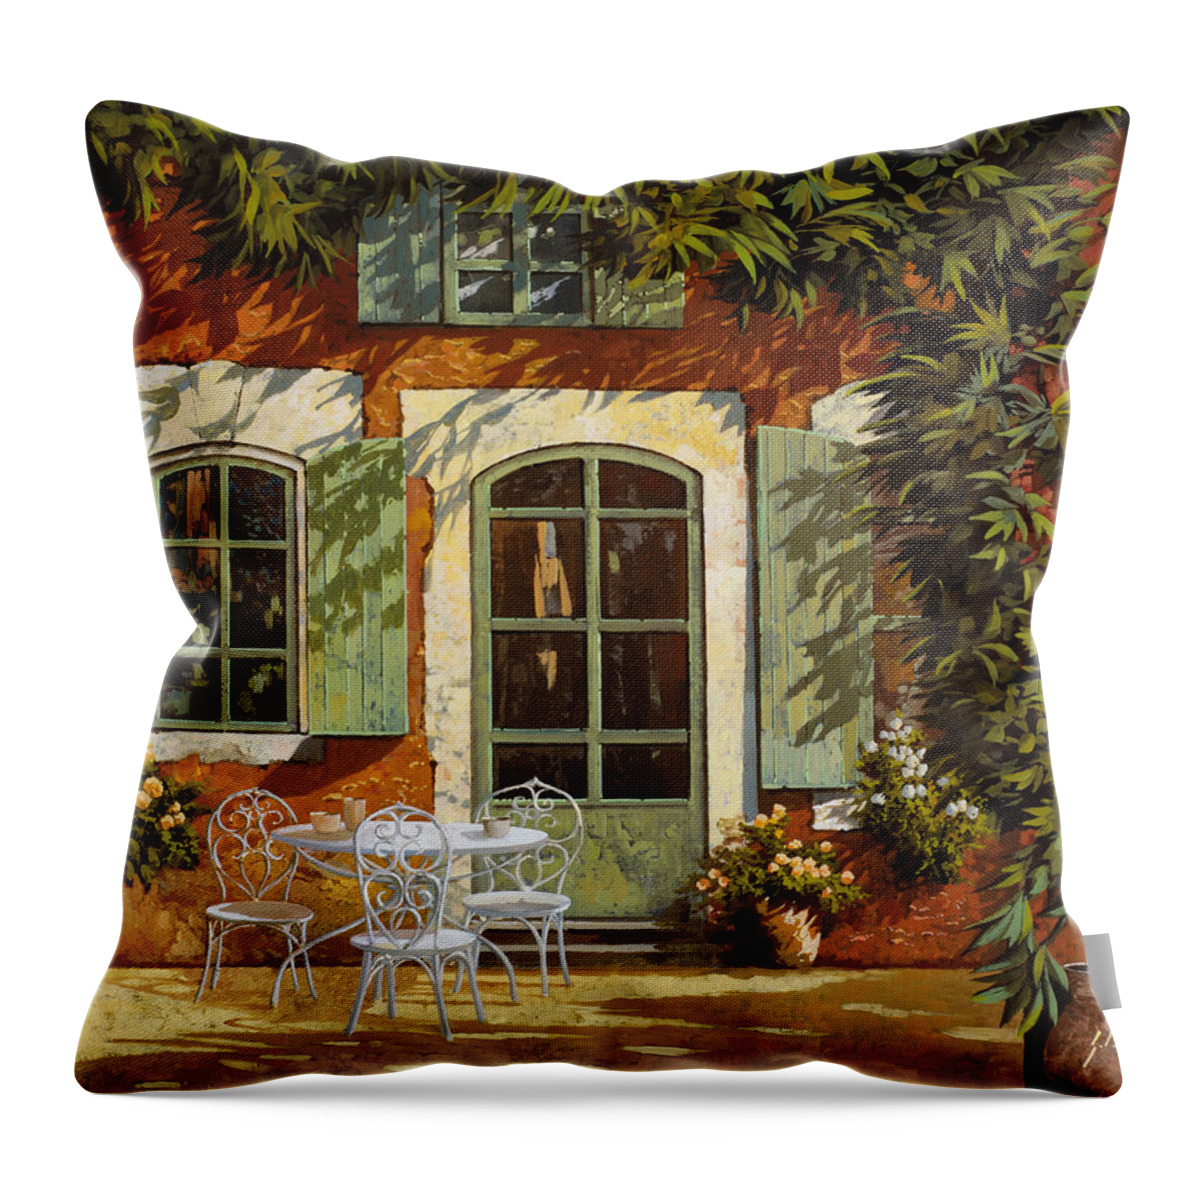 Landscape Throw Pillow featuring the painting Al Fresco In Cortile by Guido Borelli